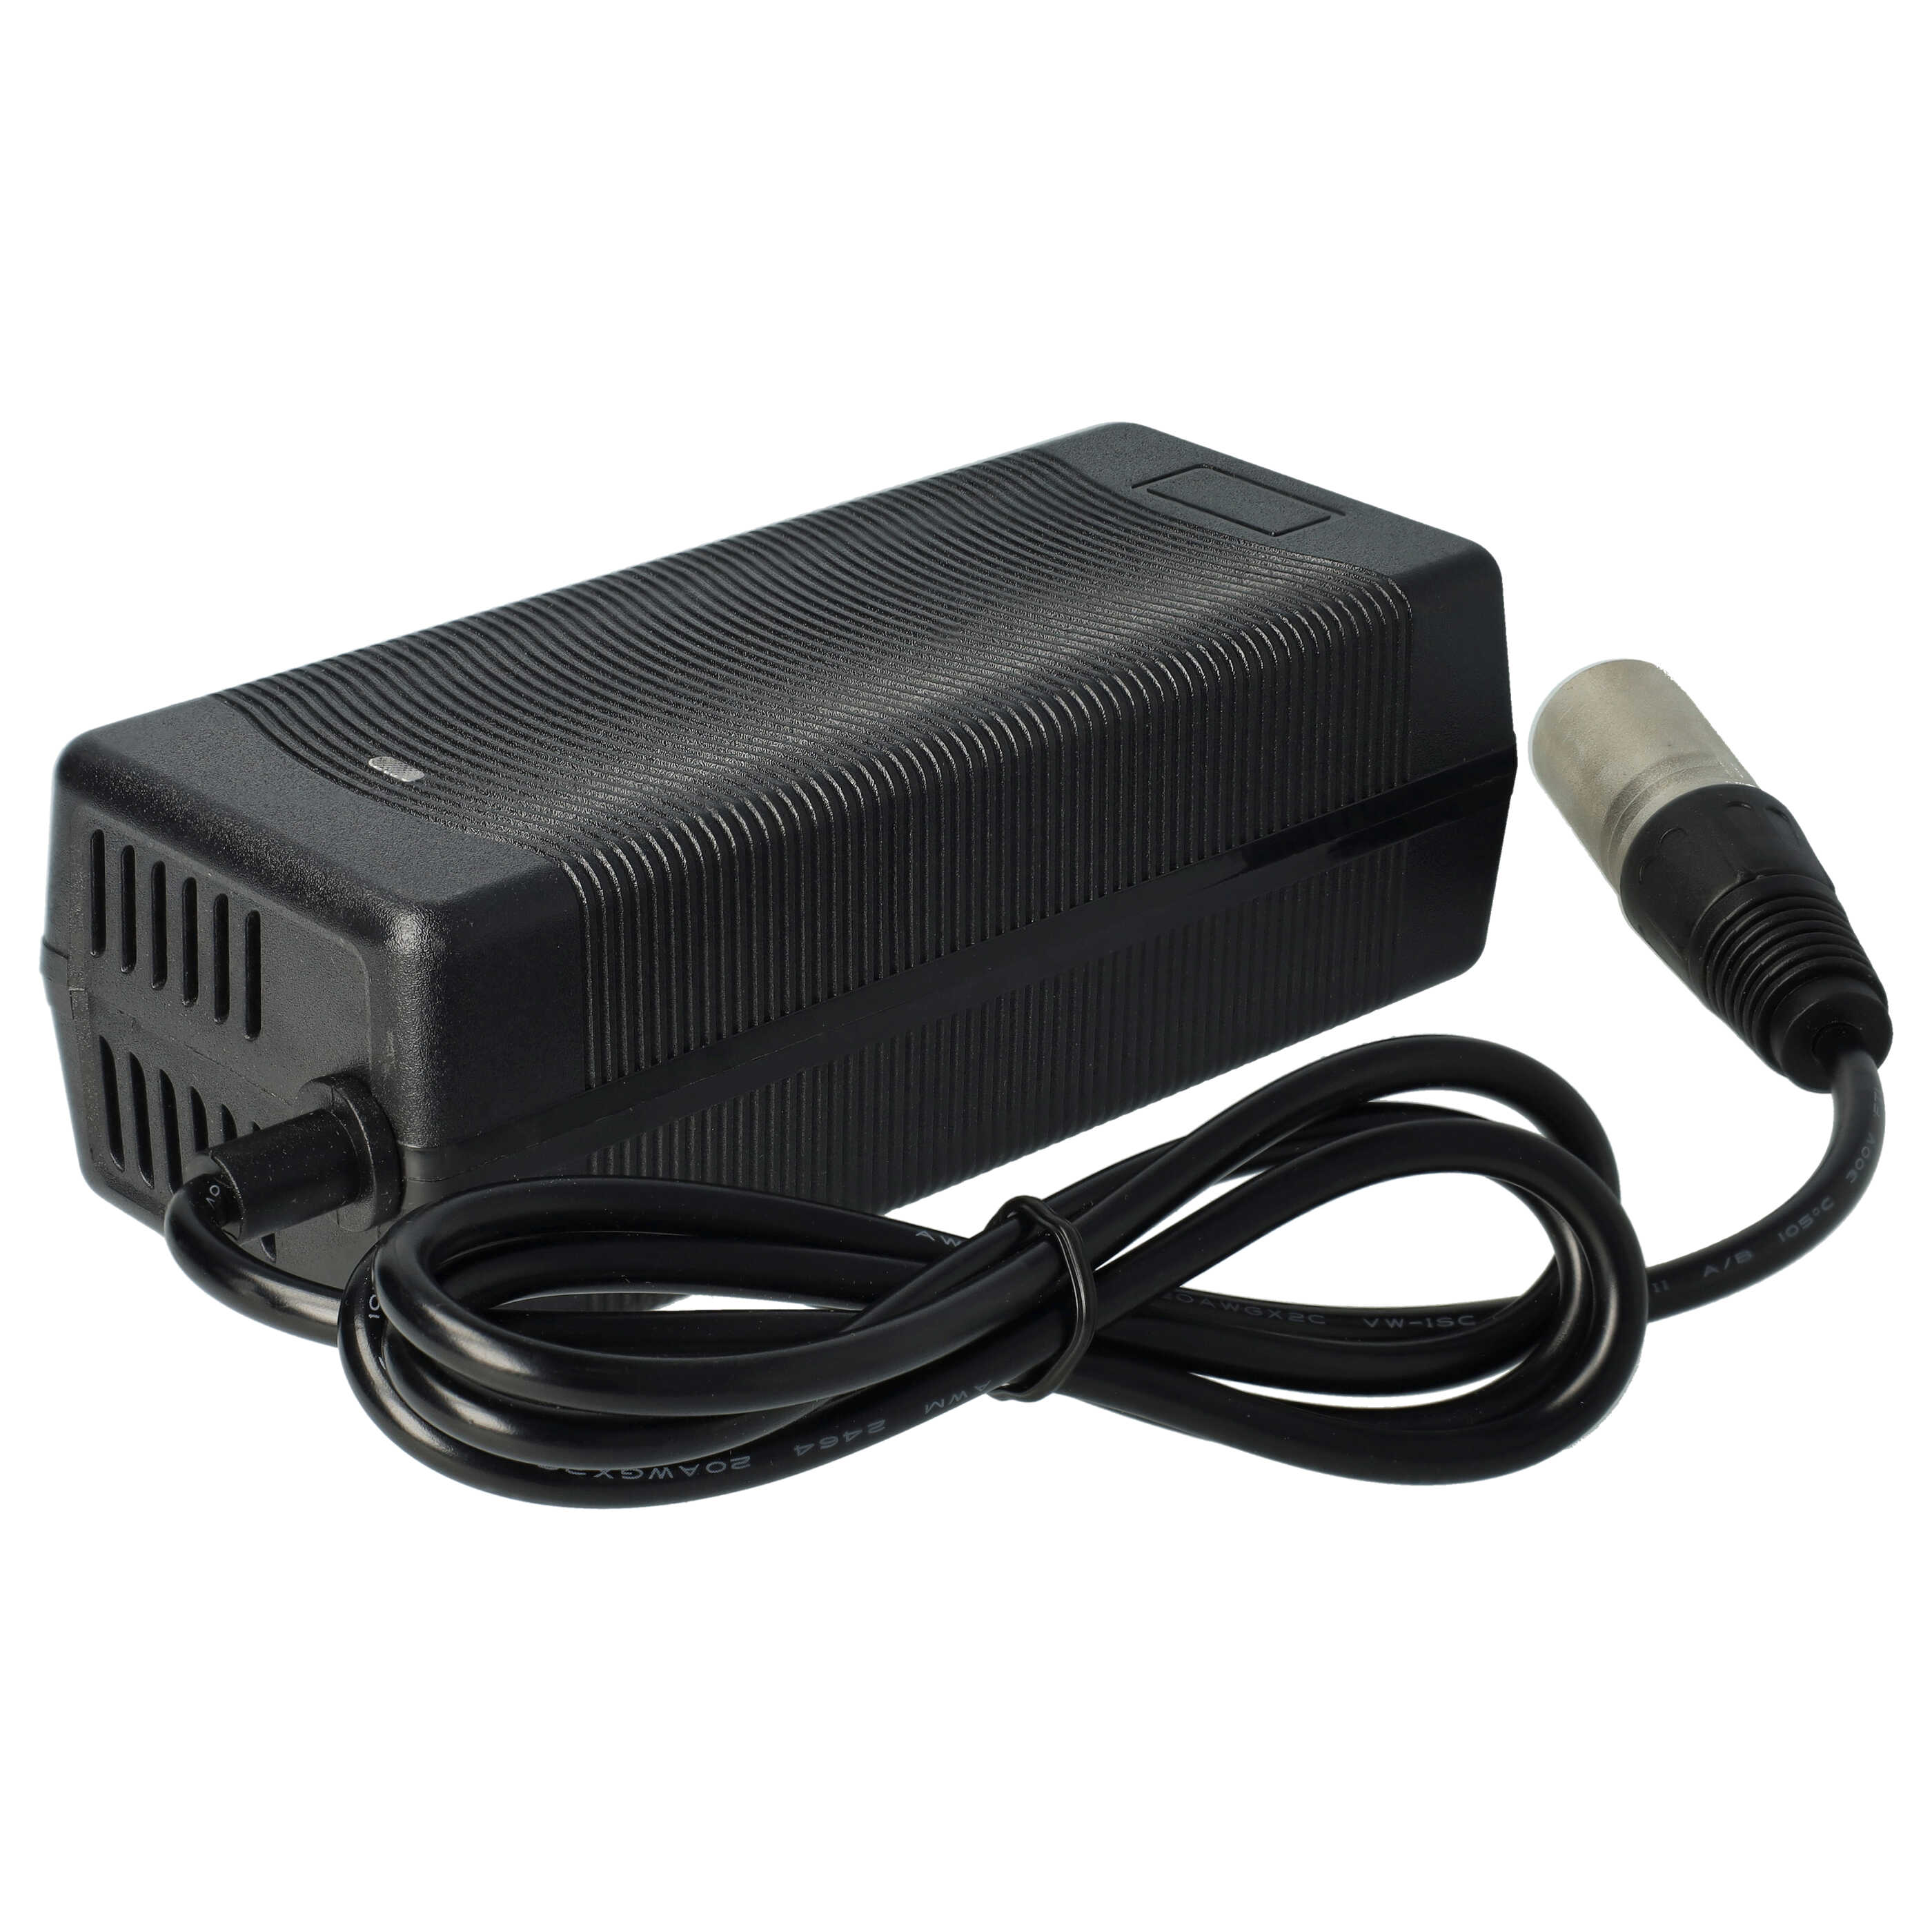 Charger suitable for Li-Ion E-Bike Battery - For 36 V Batteries, With 3 Pin Connector, 2.2 A